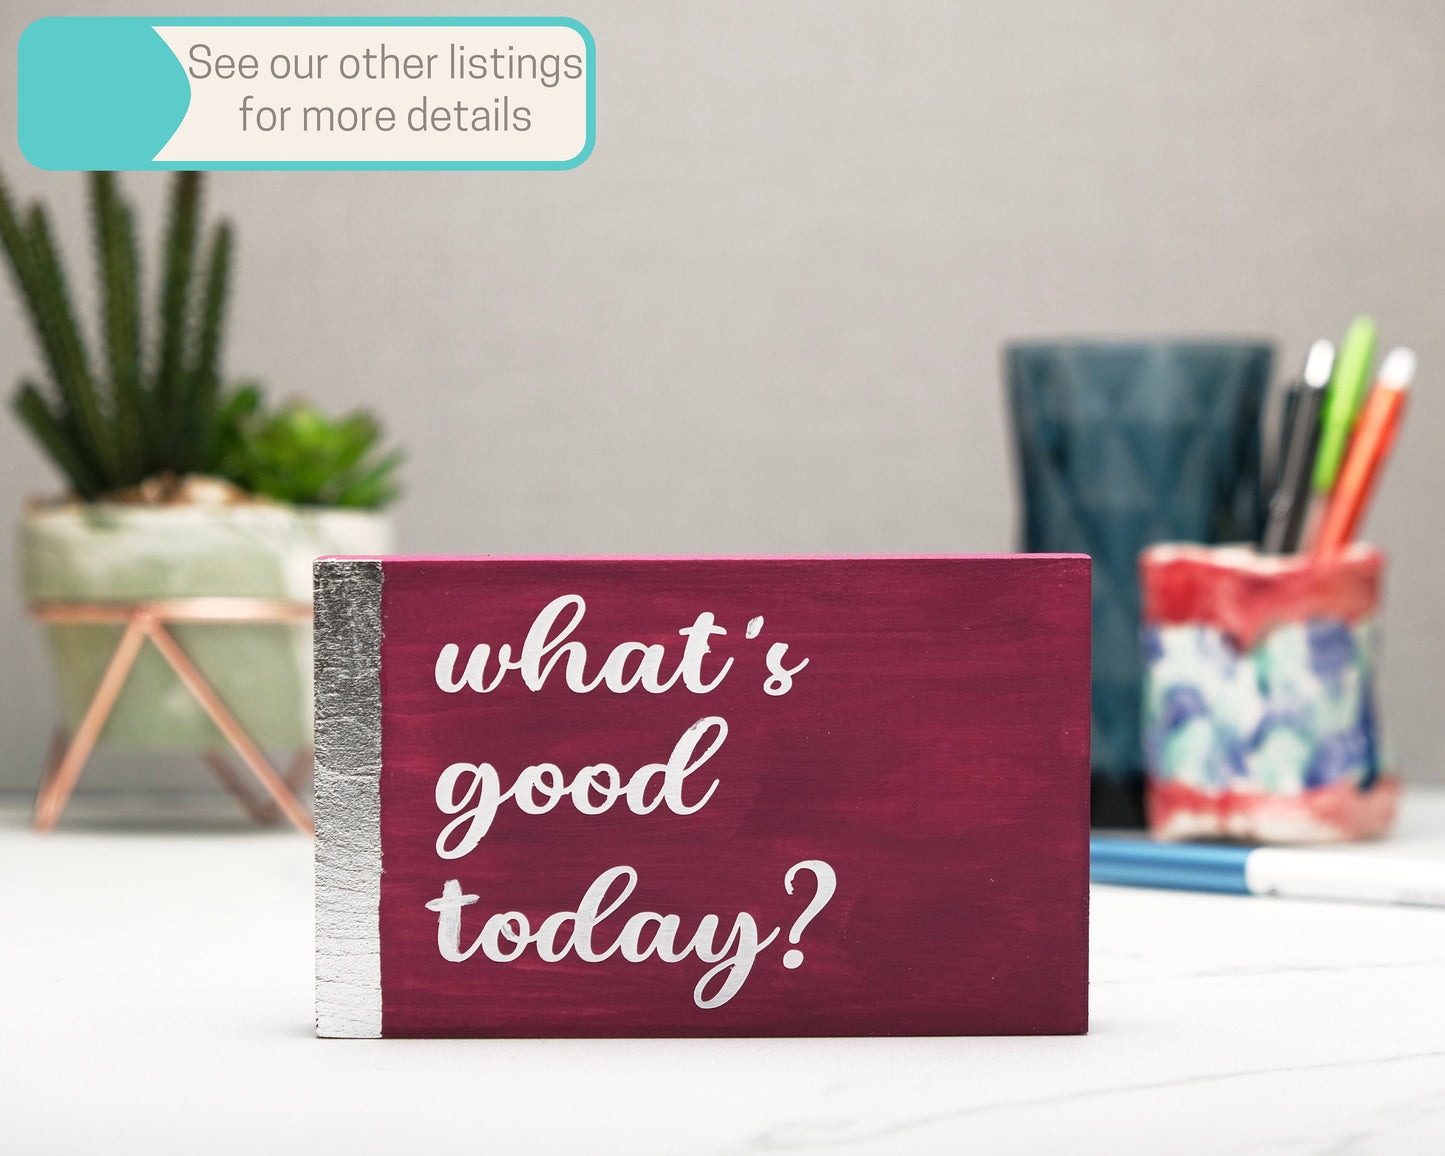 What's good today, custom wood block sign, inspirational quote, motivation, self care, gift for her, gift for him, home decor, wooden